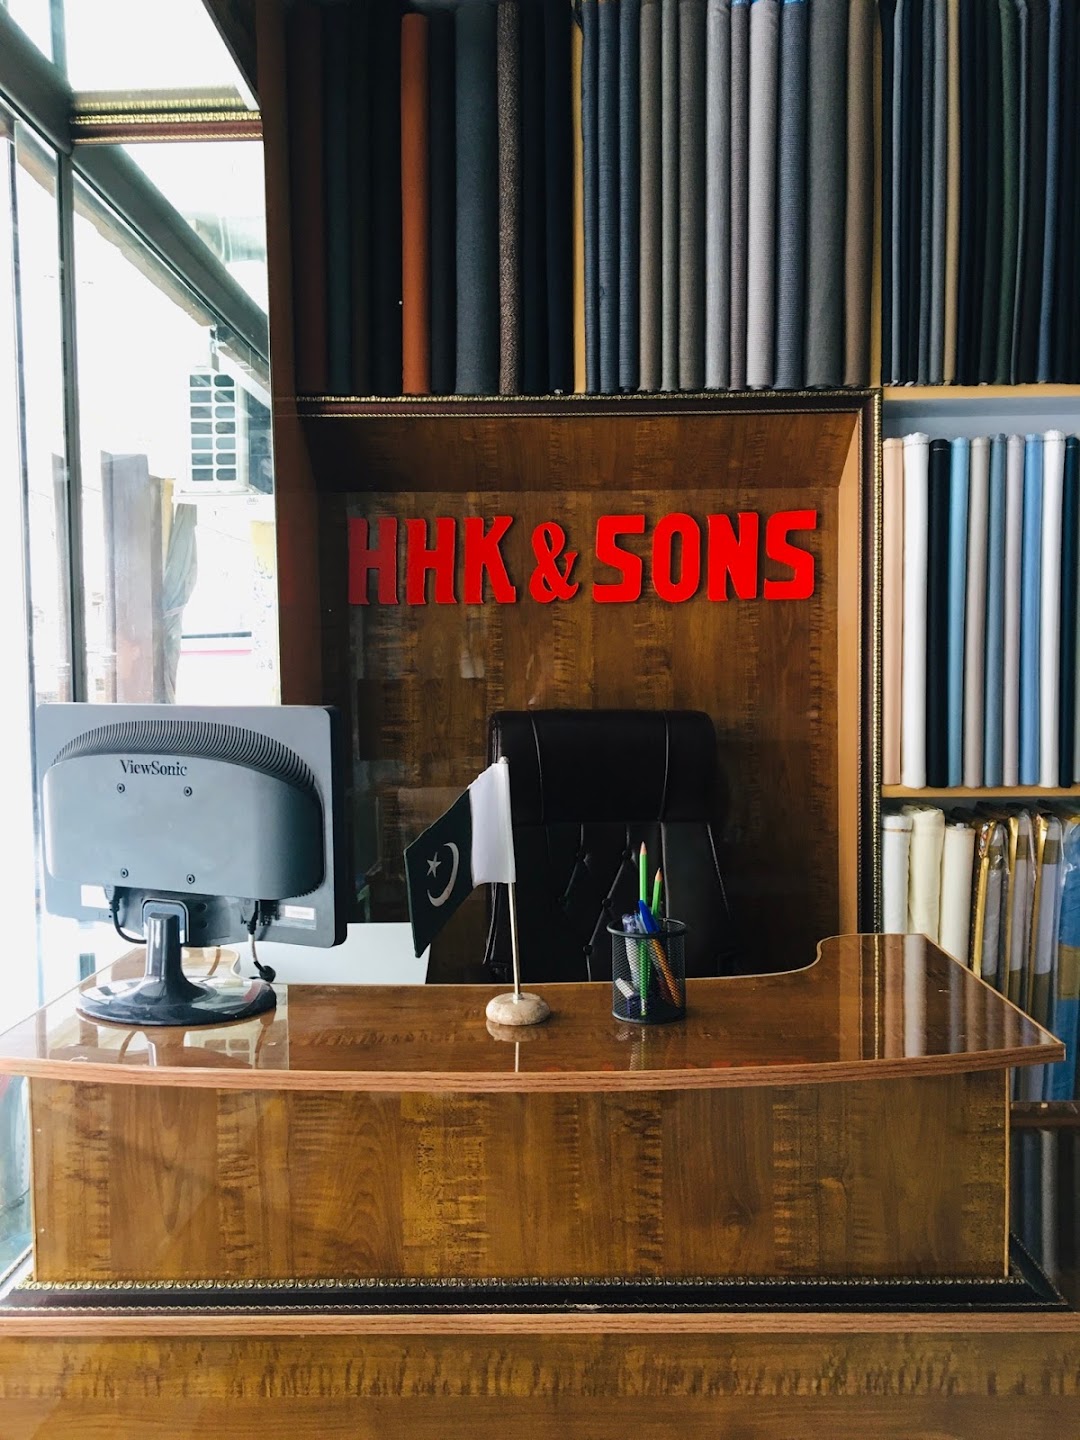 HHK & sons Fabric and stitching